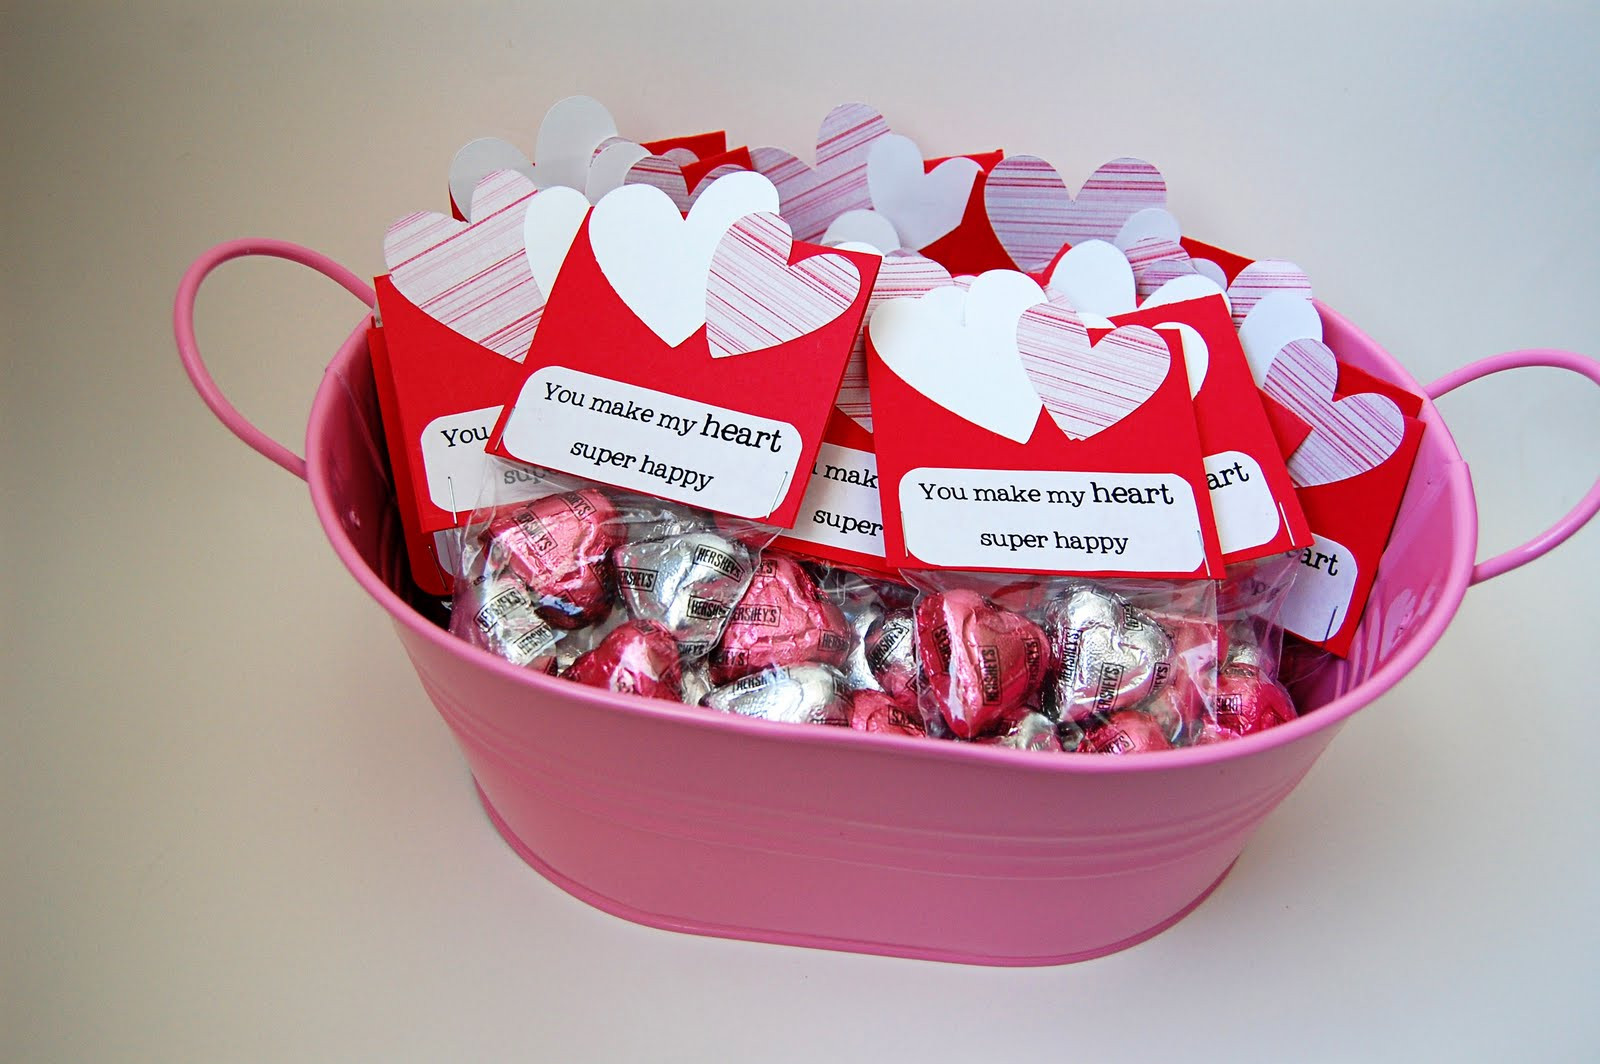 Valentines Day Home Made Gifts
 45 Homemade Valentines Day Gift Ideas For Him